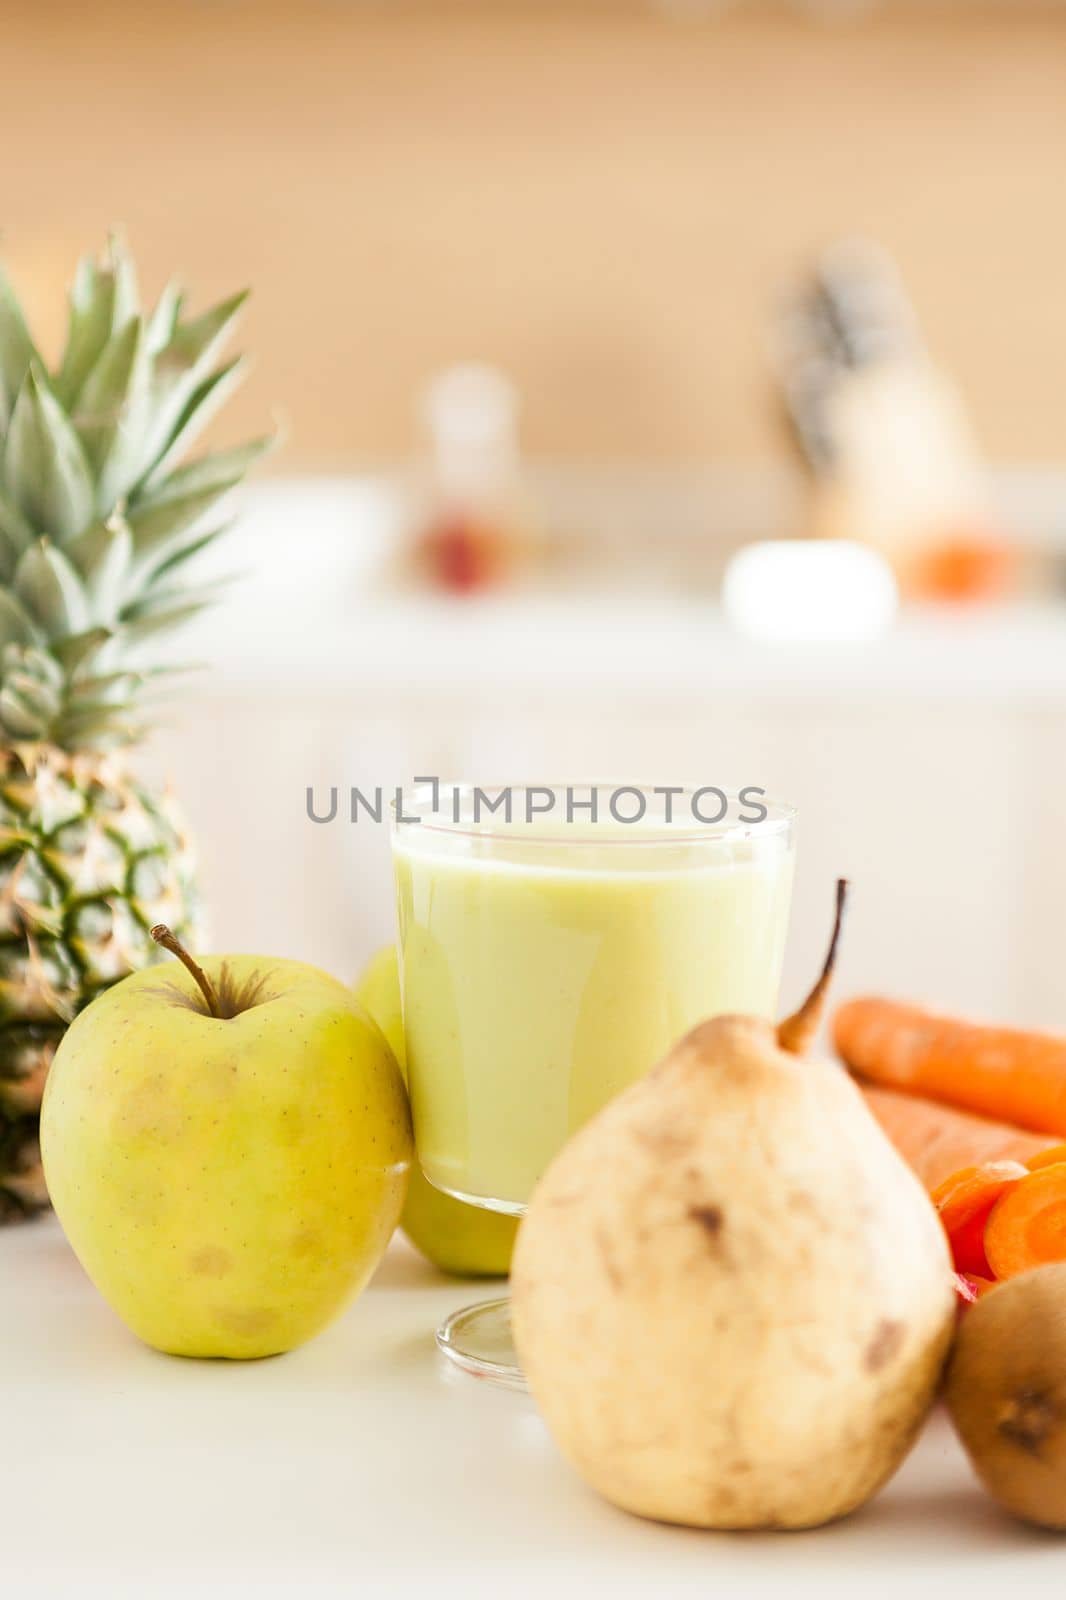 Fresh fruits, vegetables and smoothies in the home kitchen